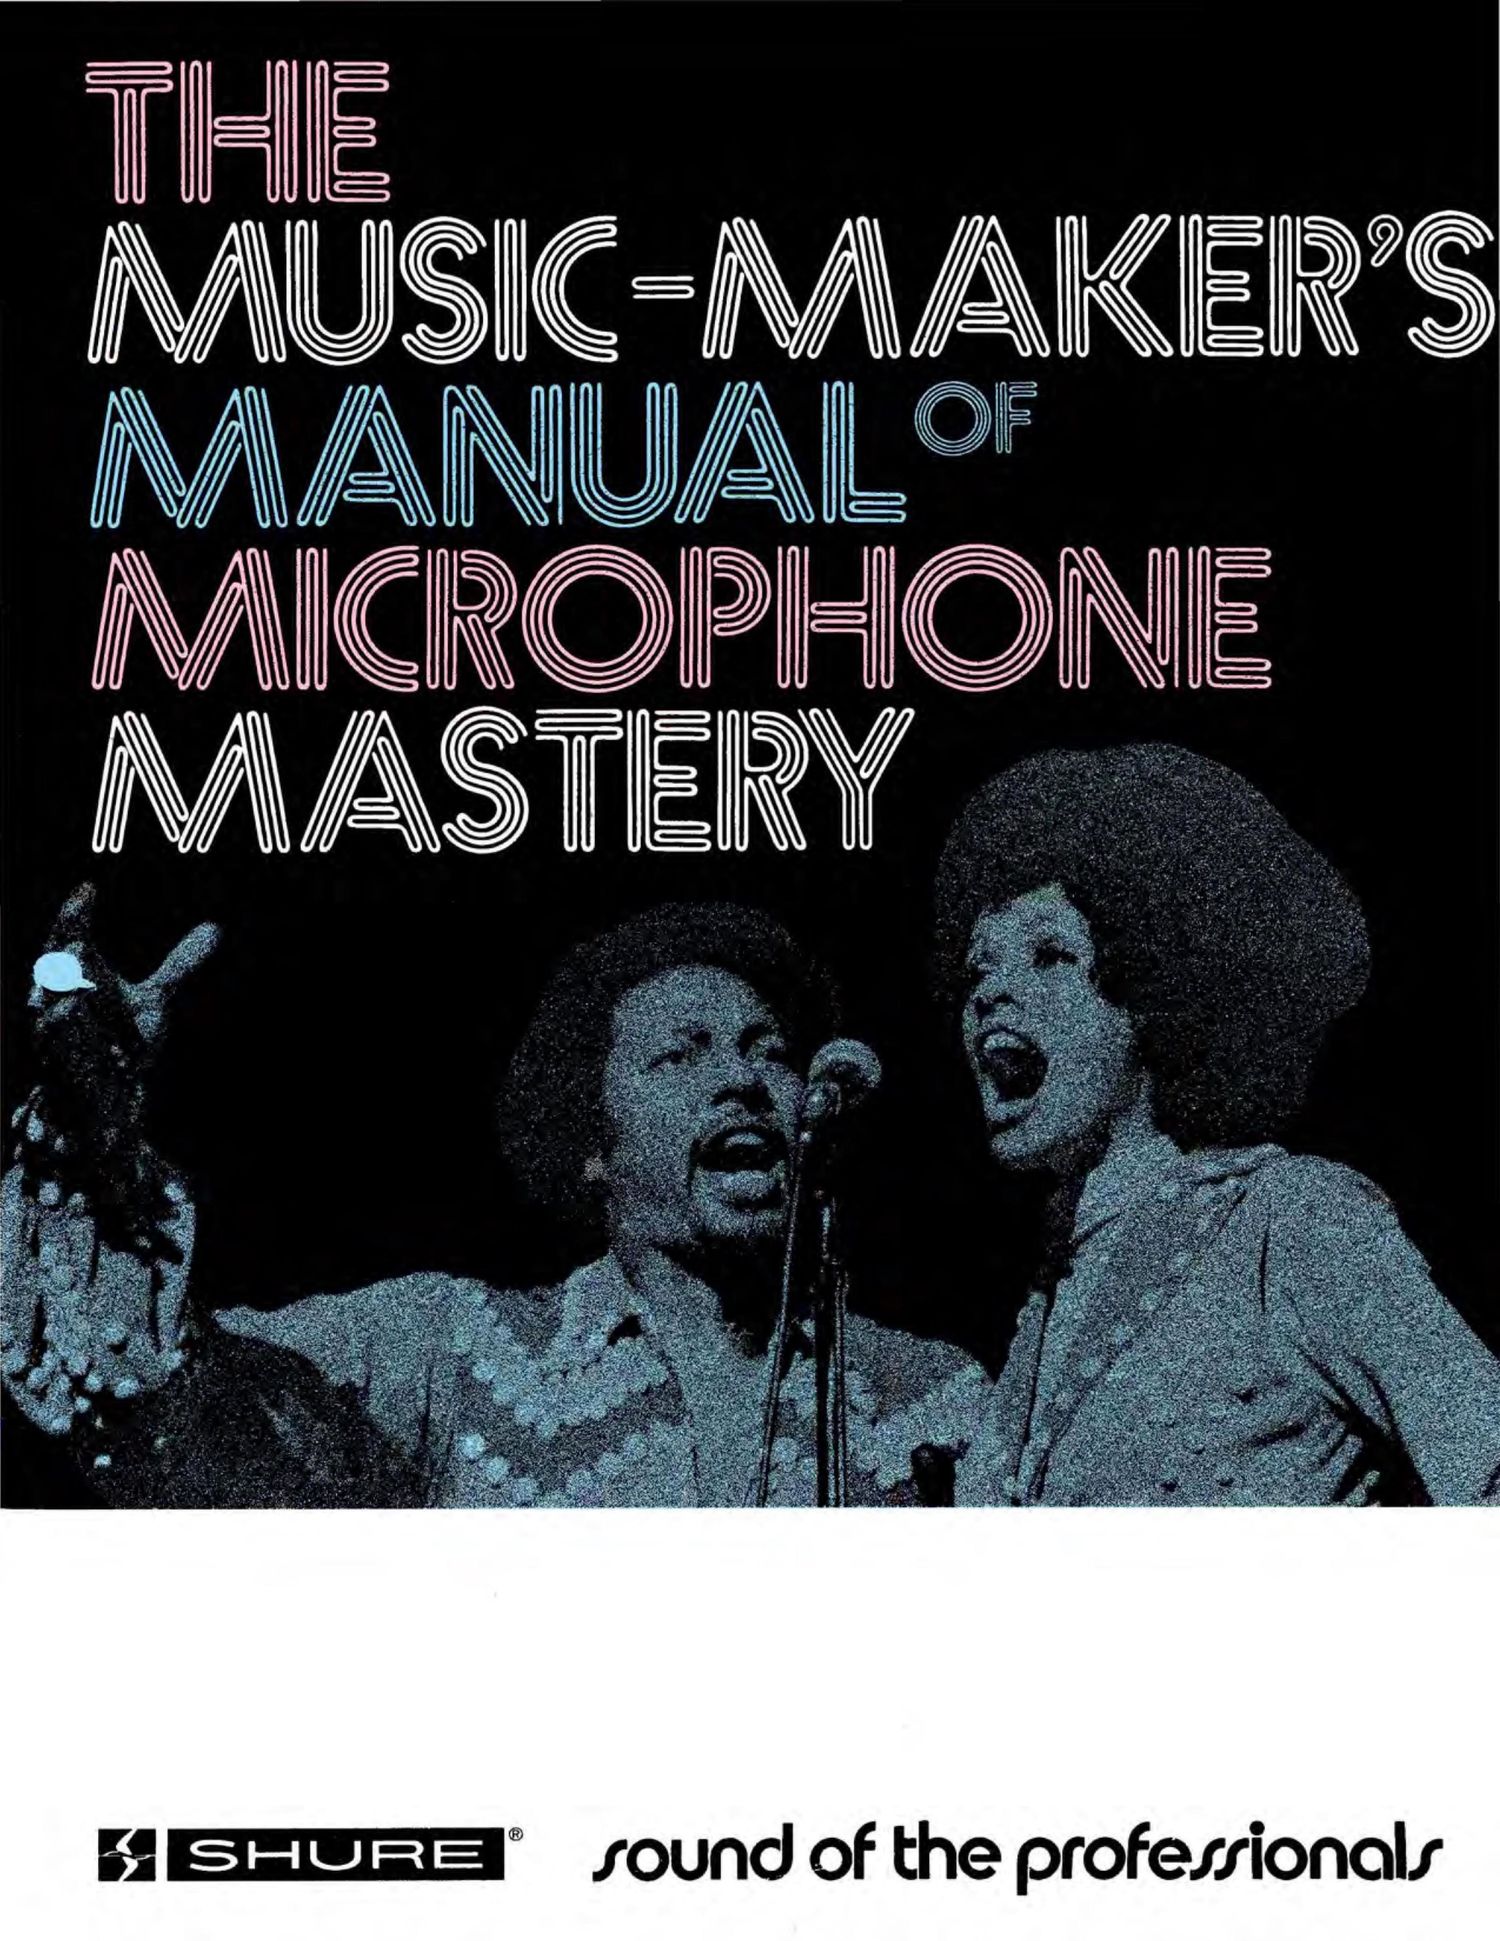 shure 1974 catalogue microphone mastery